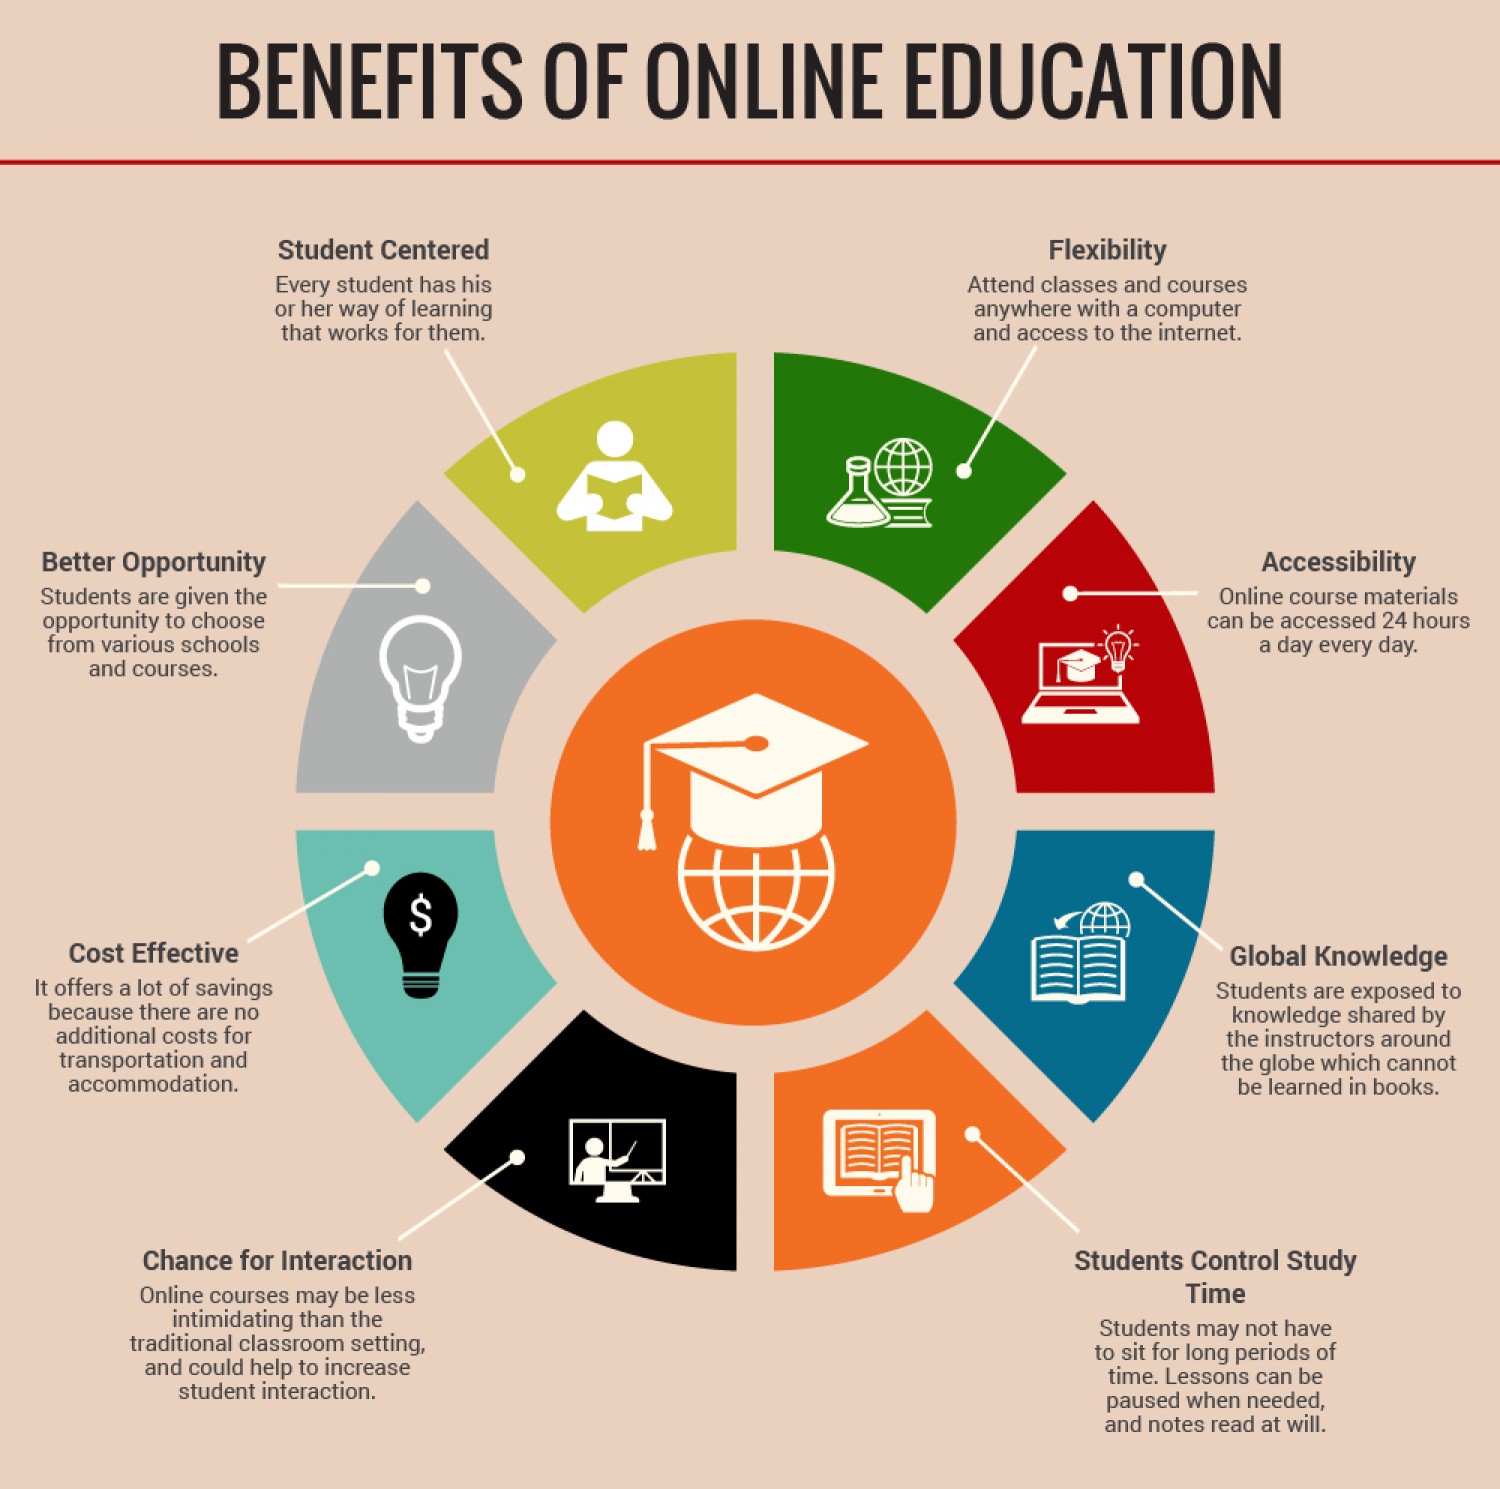 benefits-of-online-education_53f5d86439ac2_w1500